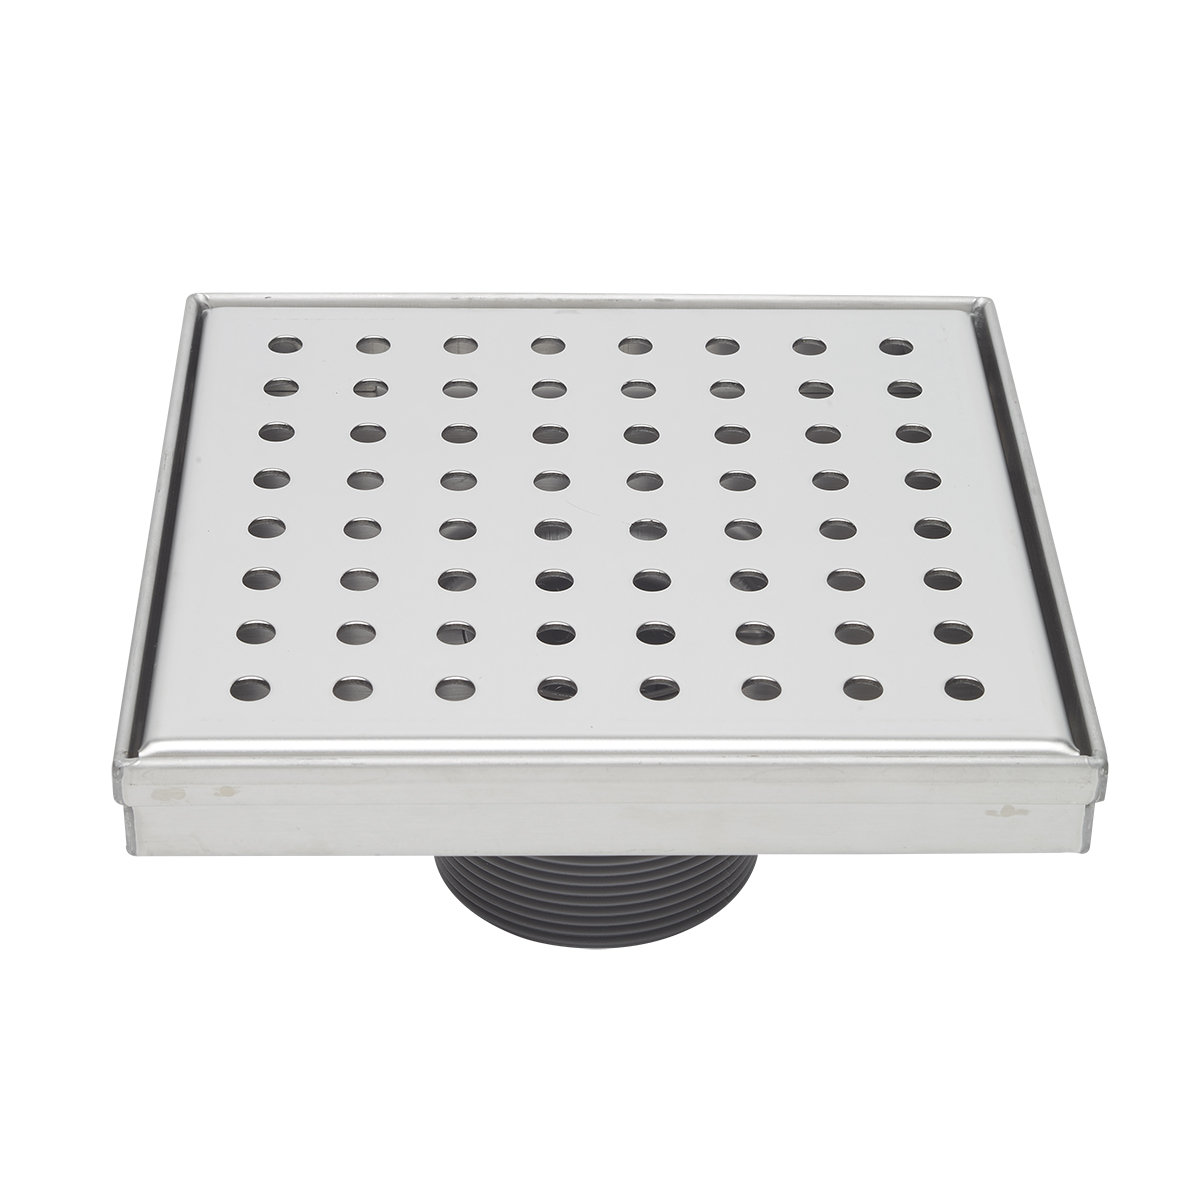 Can I Install a Square Bathroom Drain Cover Over a Round Drain?